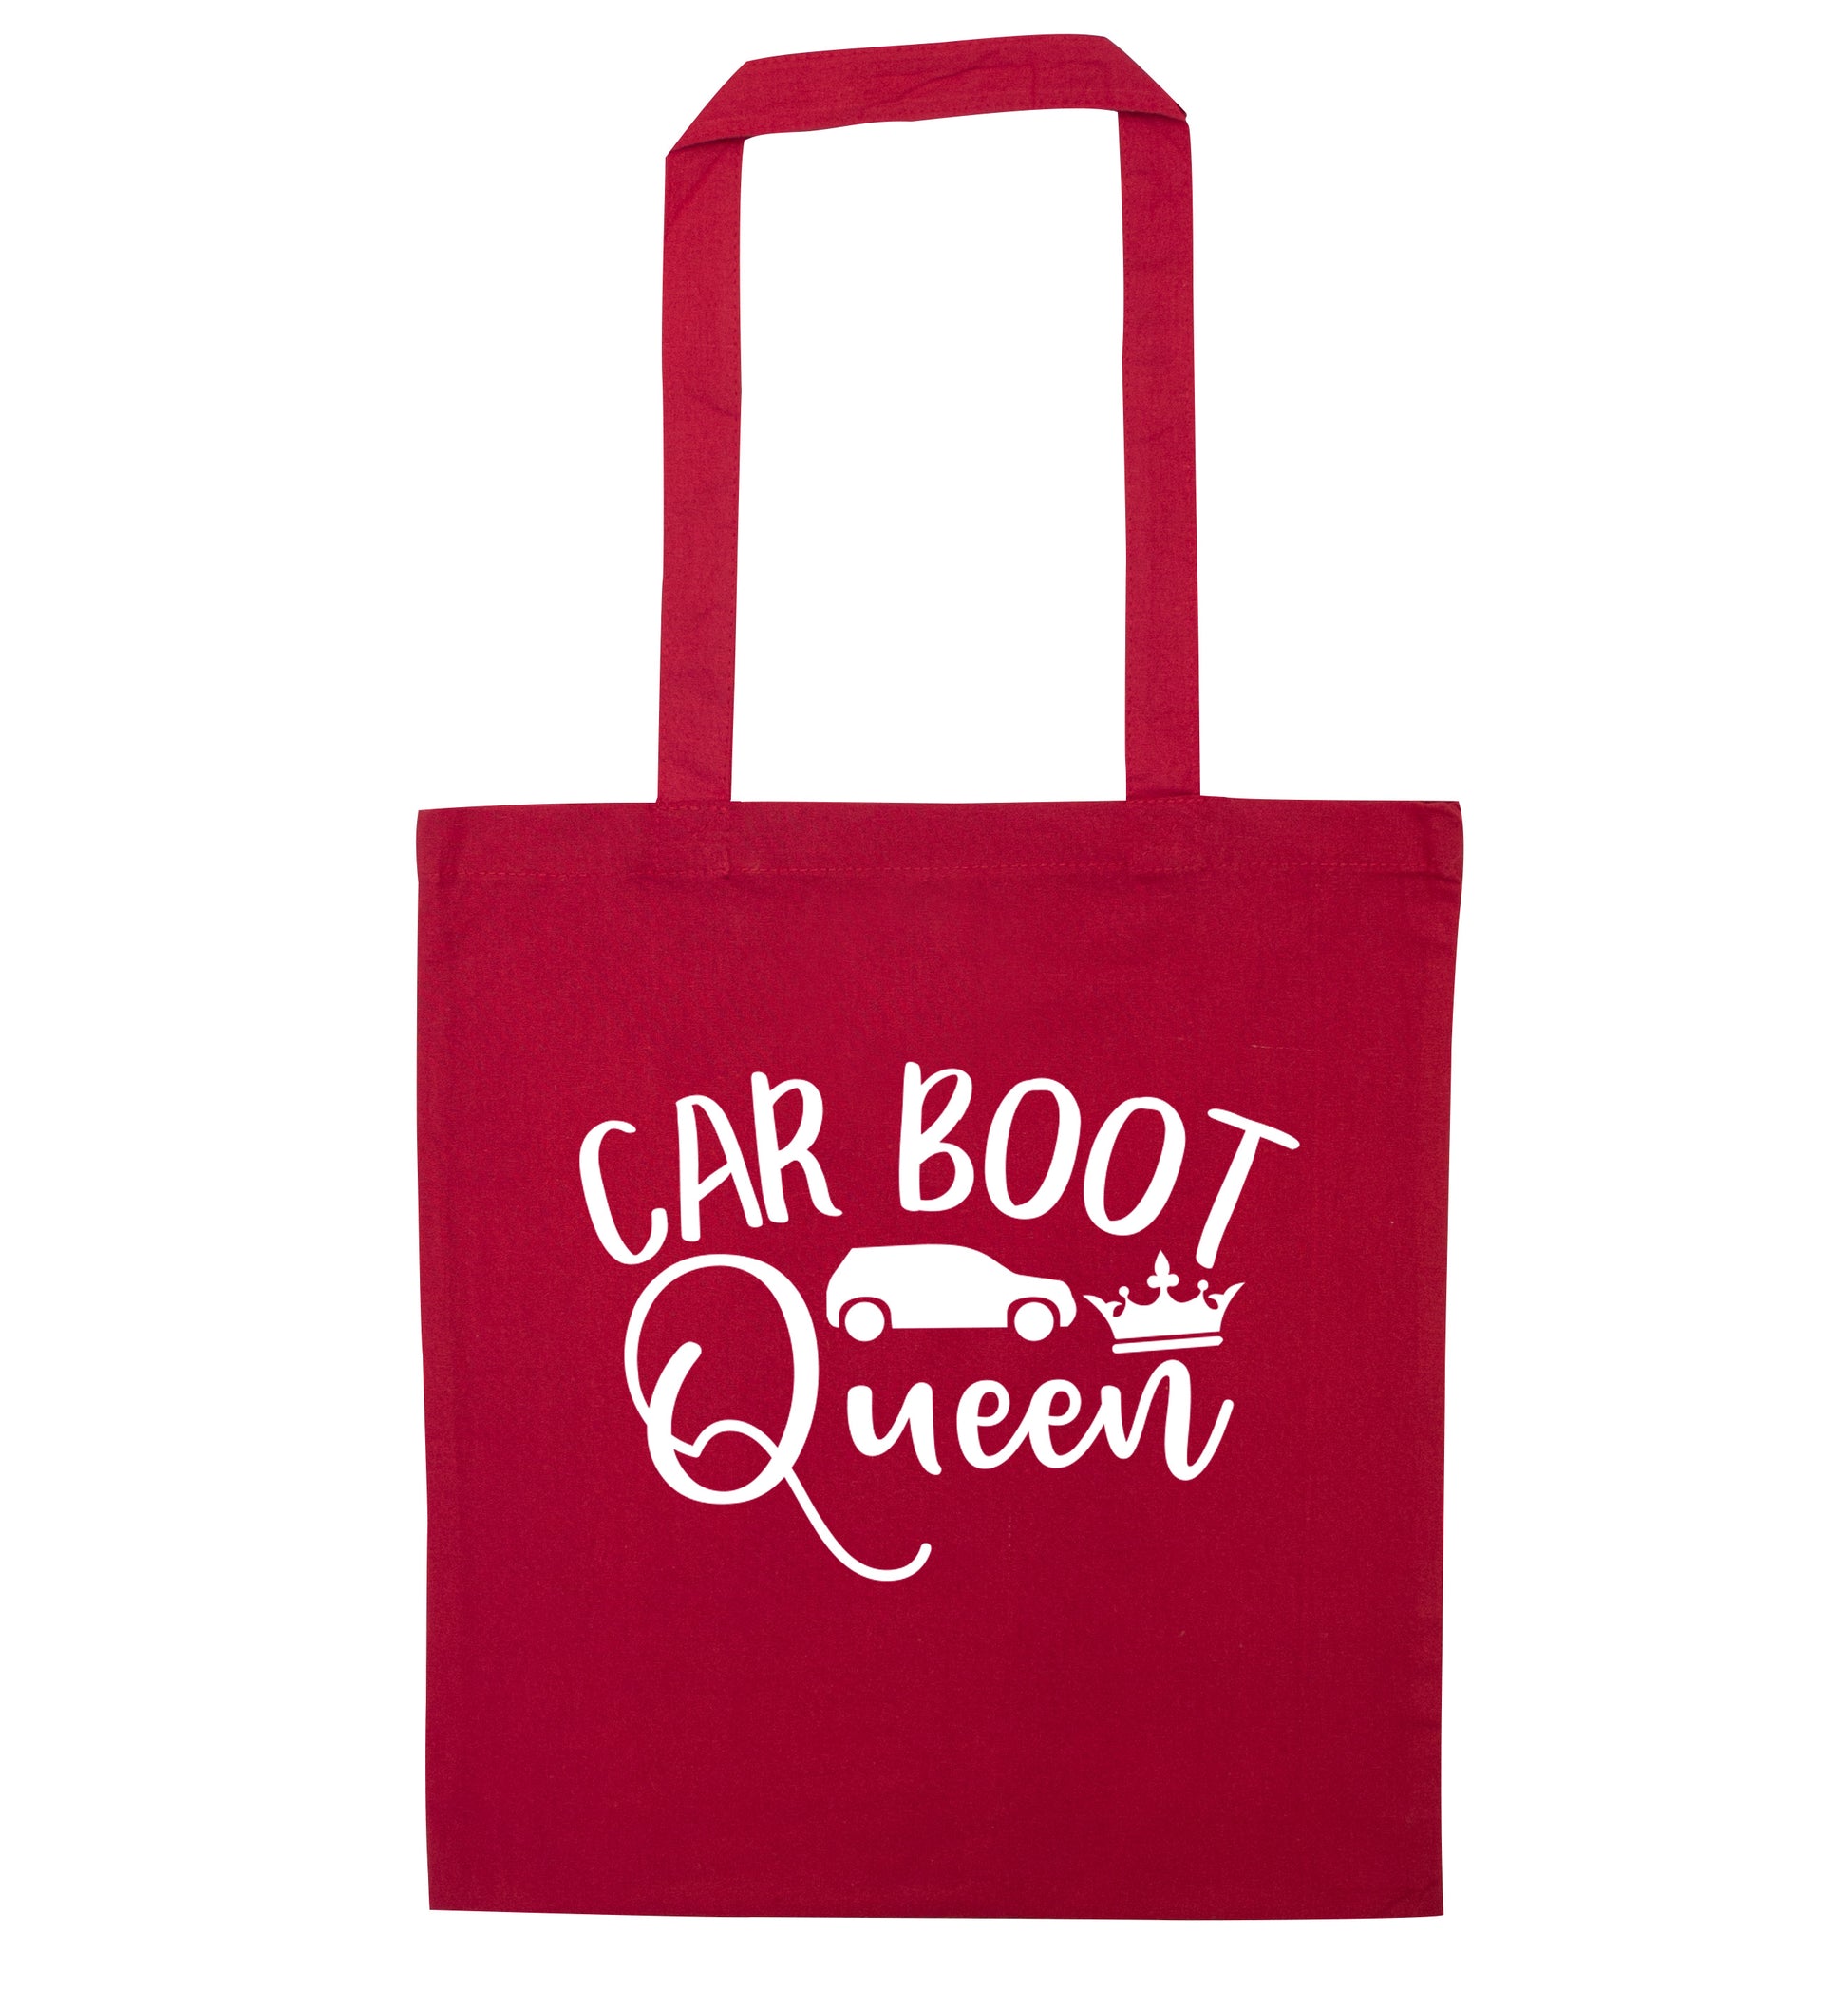 Carboot Queen red tote bag